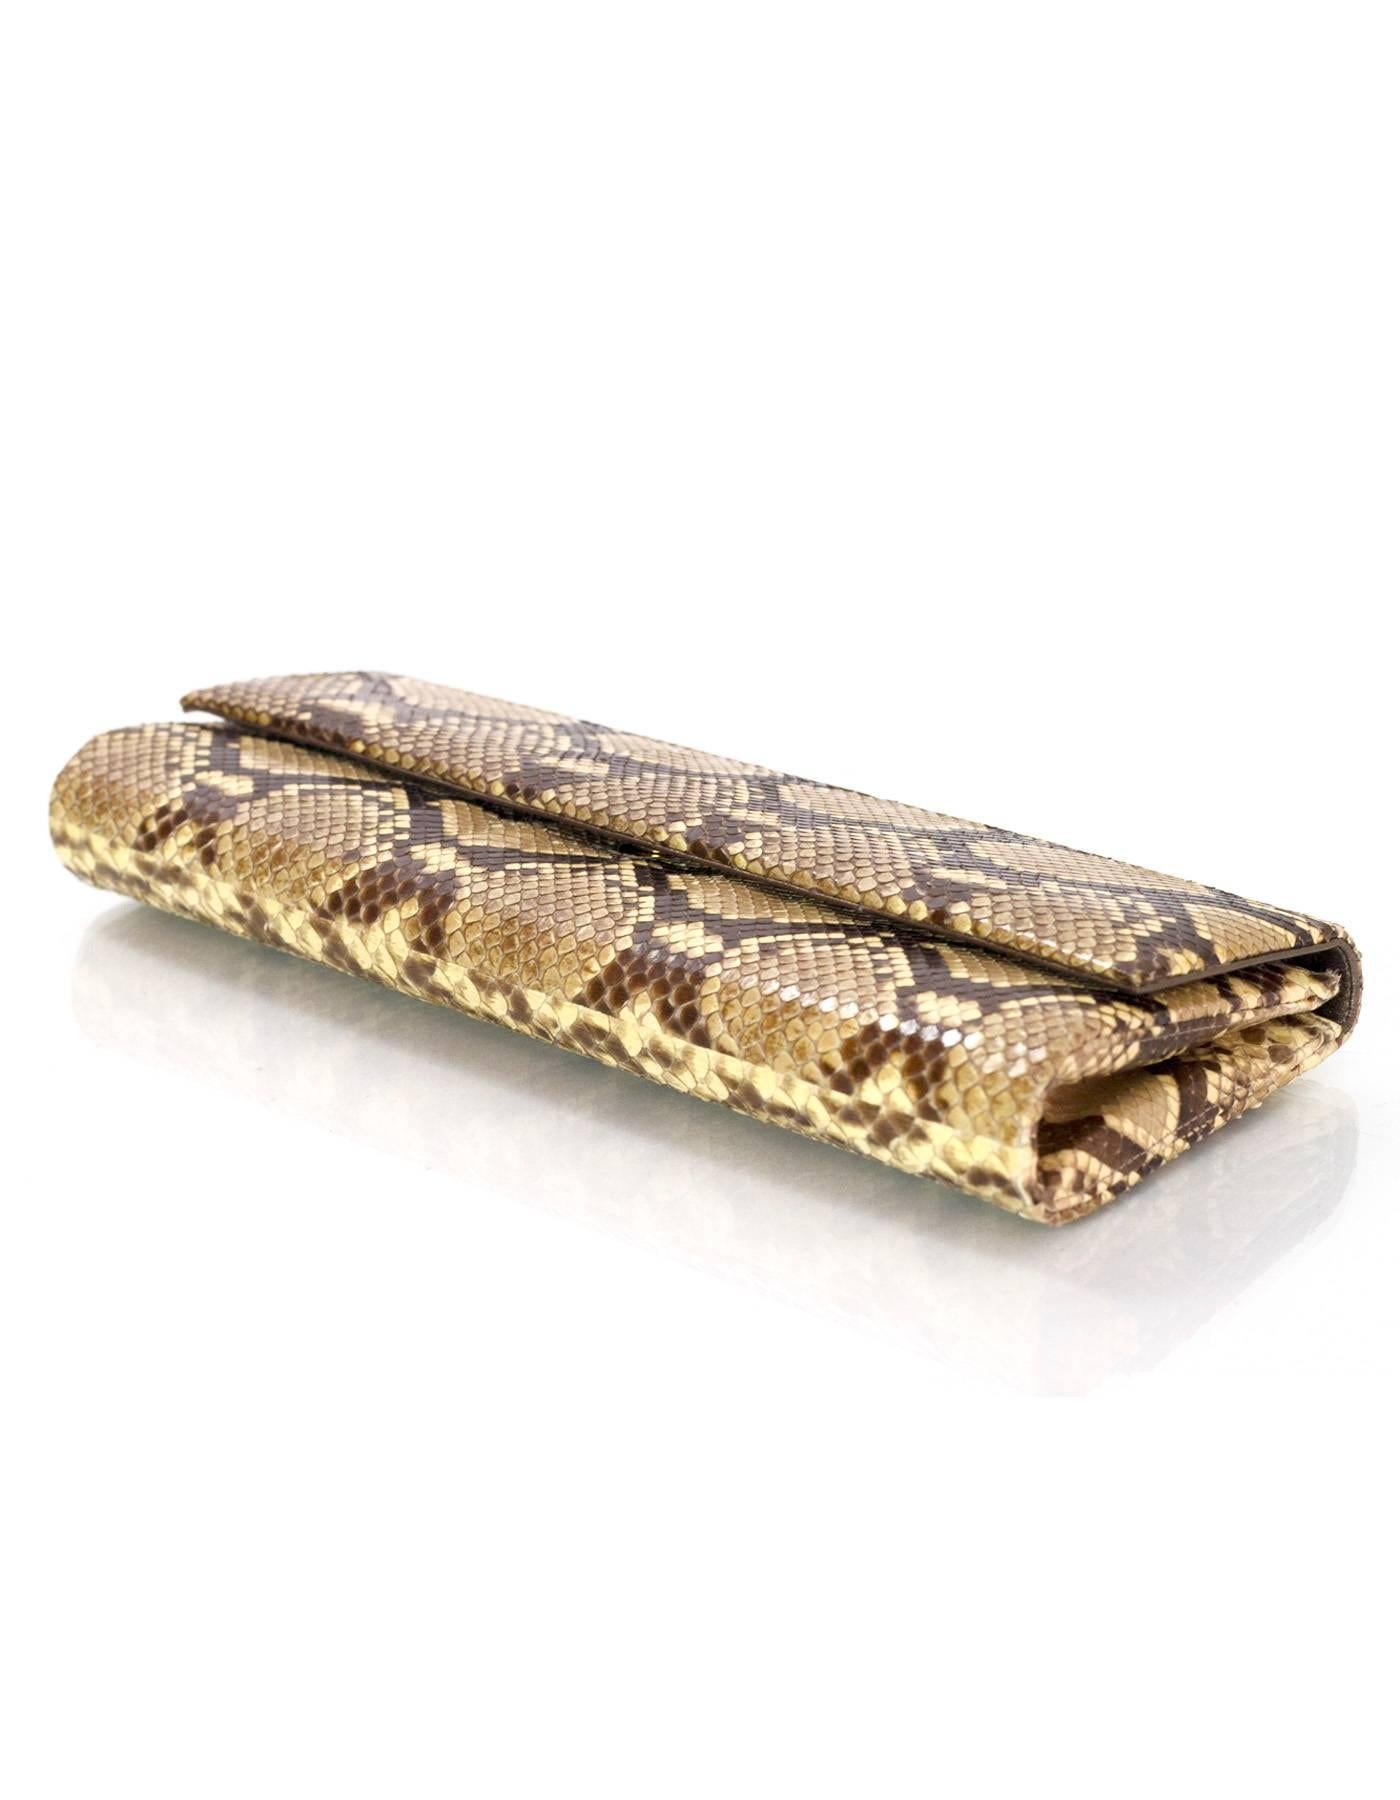 Darby Scott Python Clutch Bag GHW In Excellent Condition In New York, NY